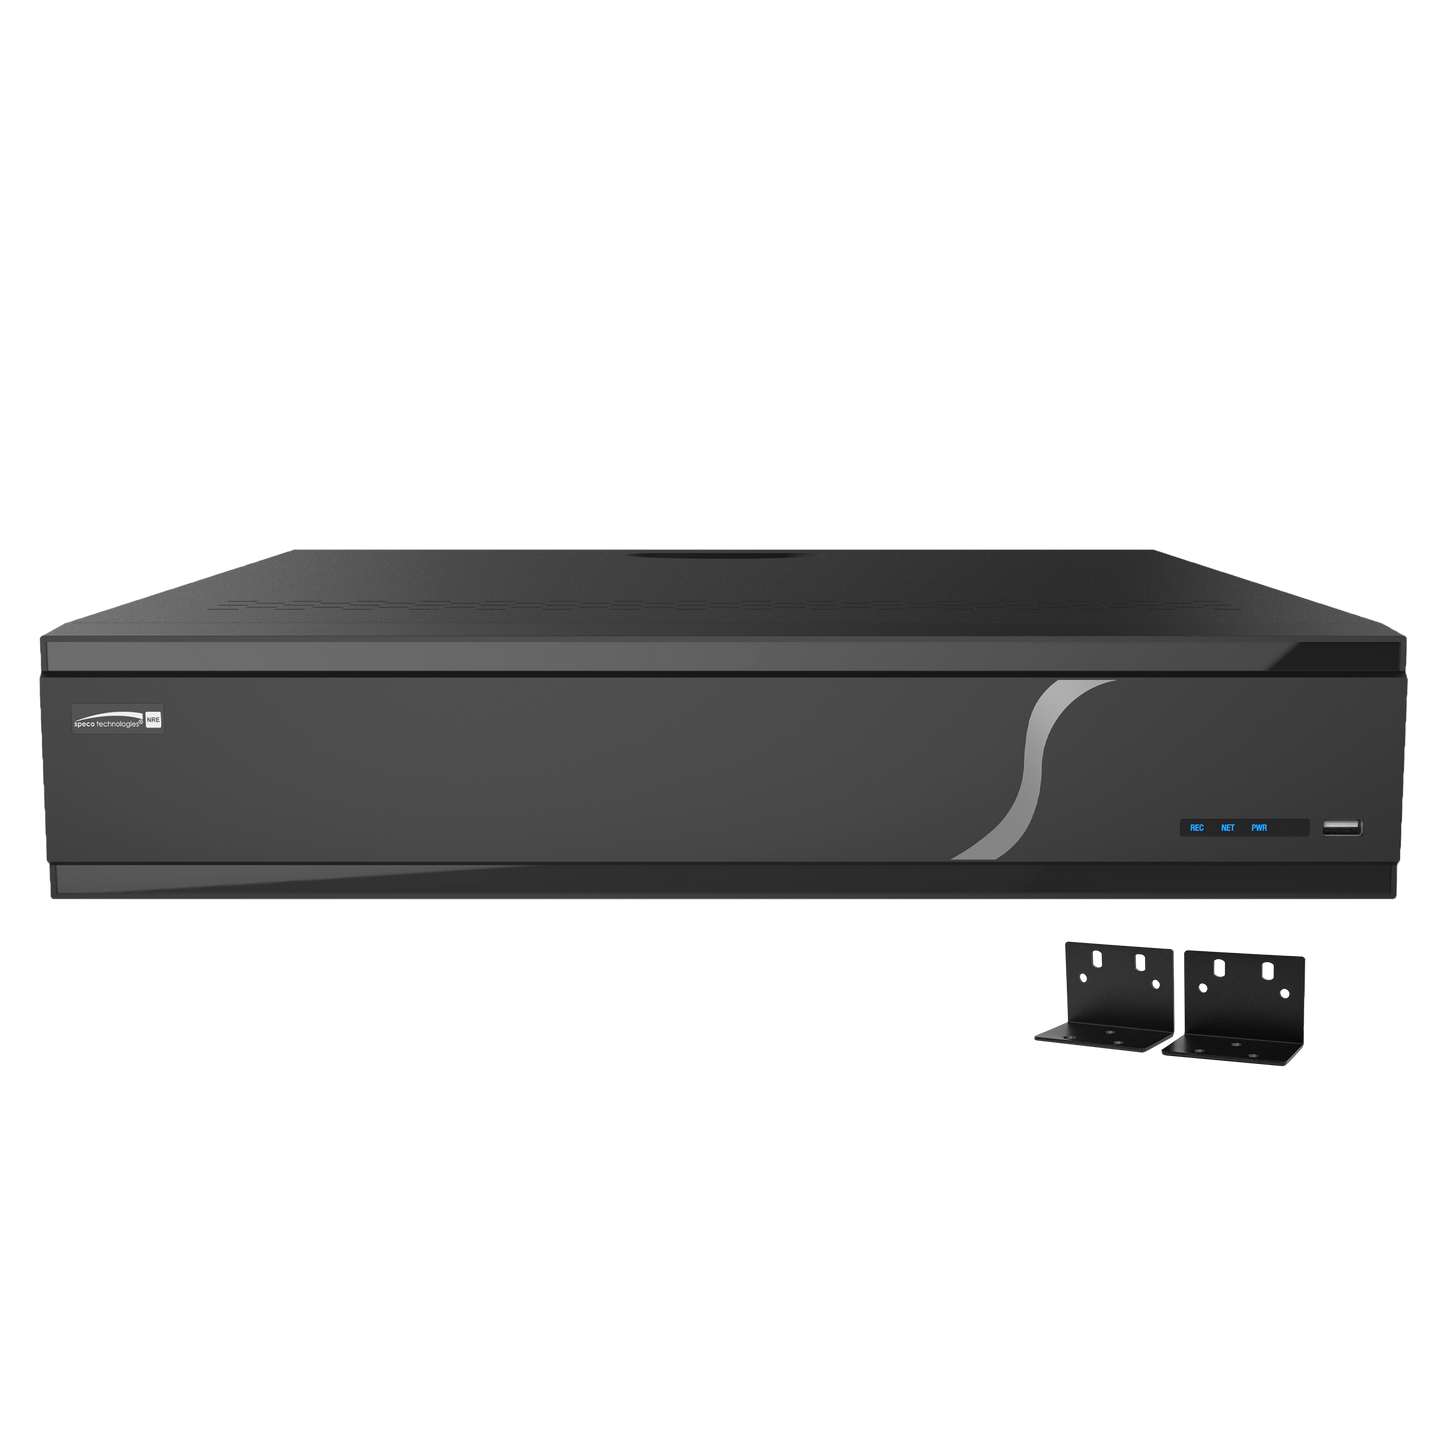 4K H.265 NVR with Facial Recognition and Smart Analytics  32 Channel NVR, 2-128TB Storage